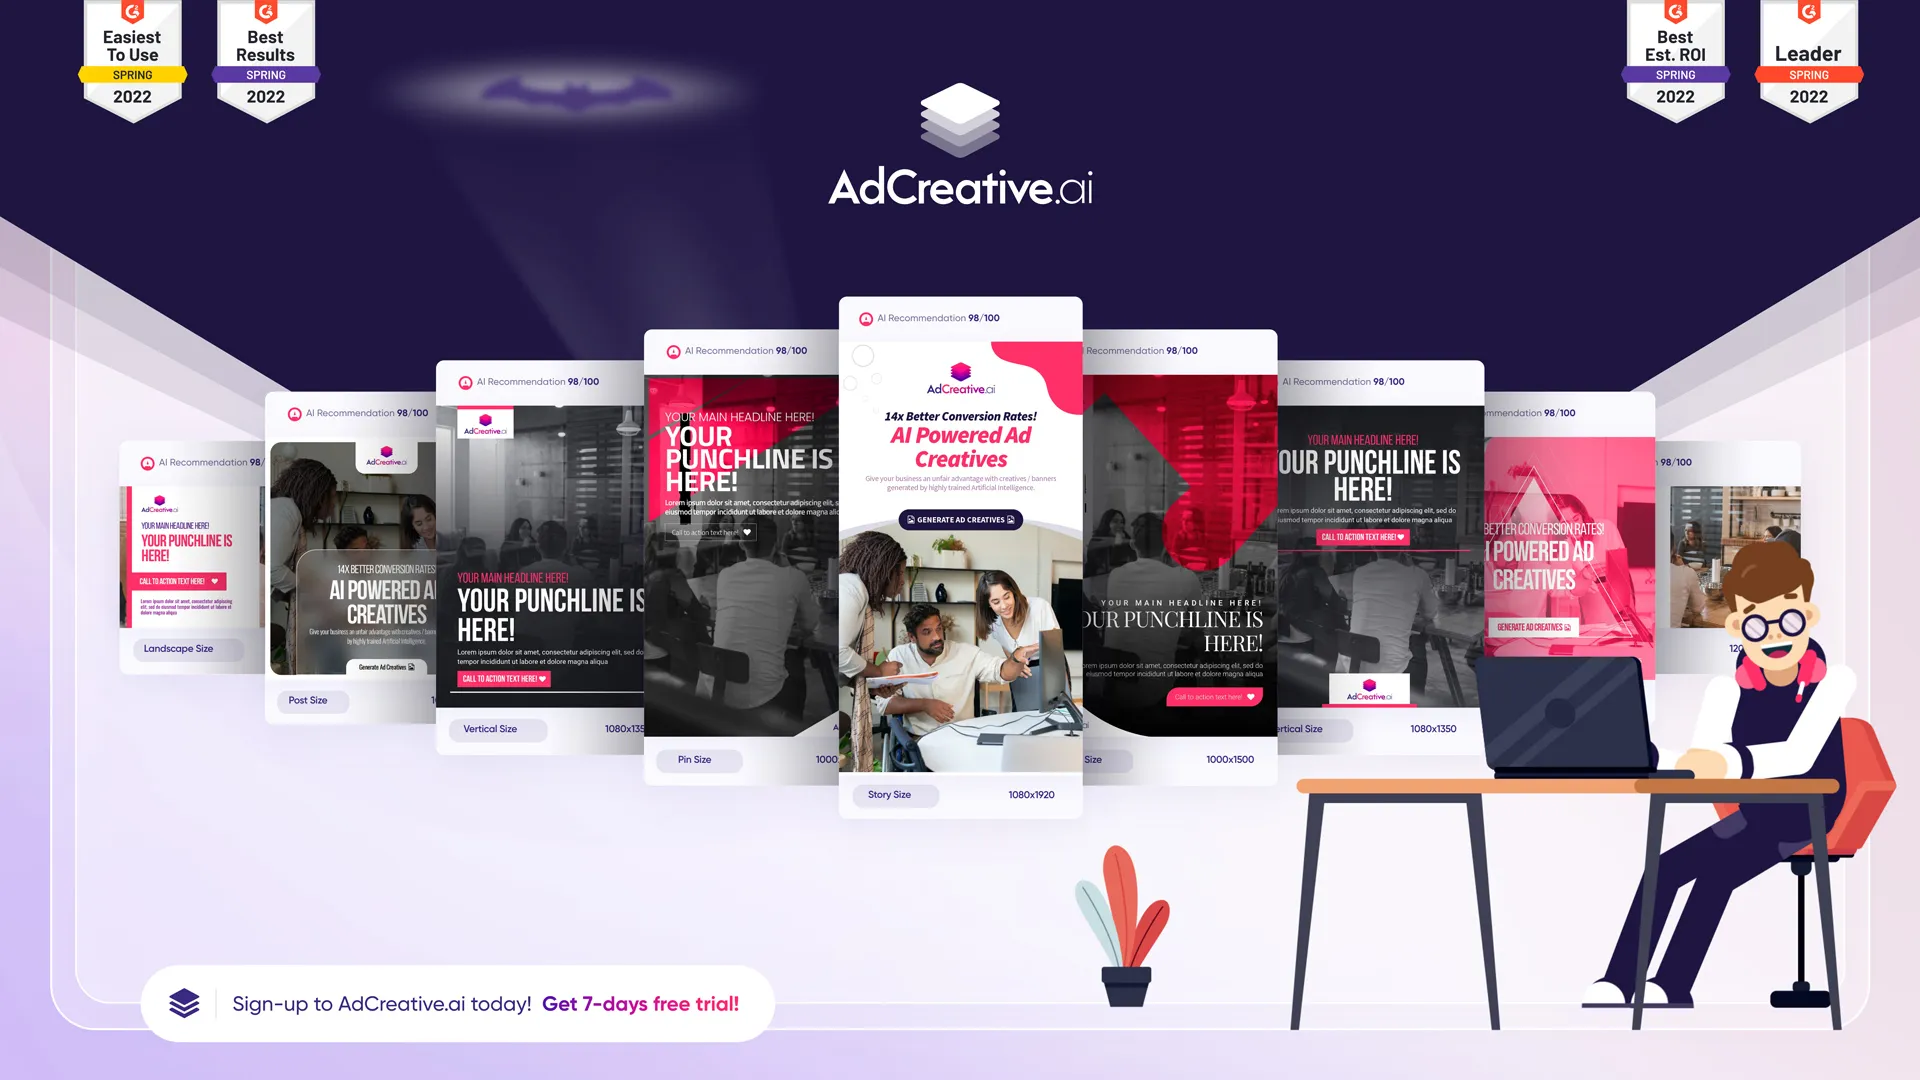 No 1 most used AI tool for advertising AdCreative.ai “how it changed my life easy..!”